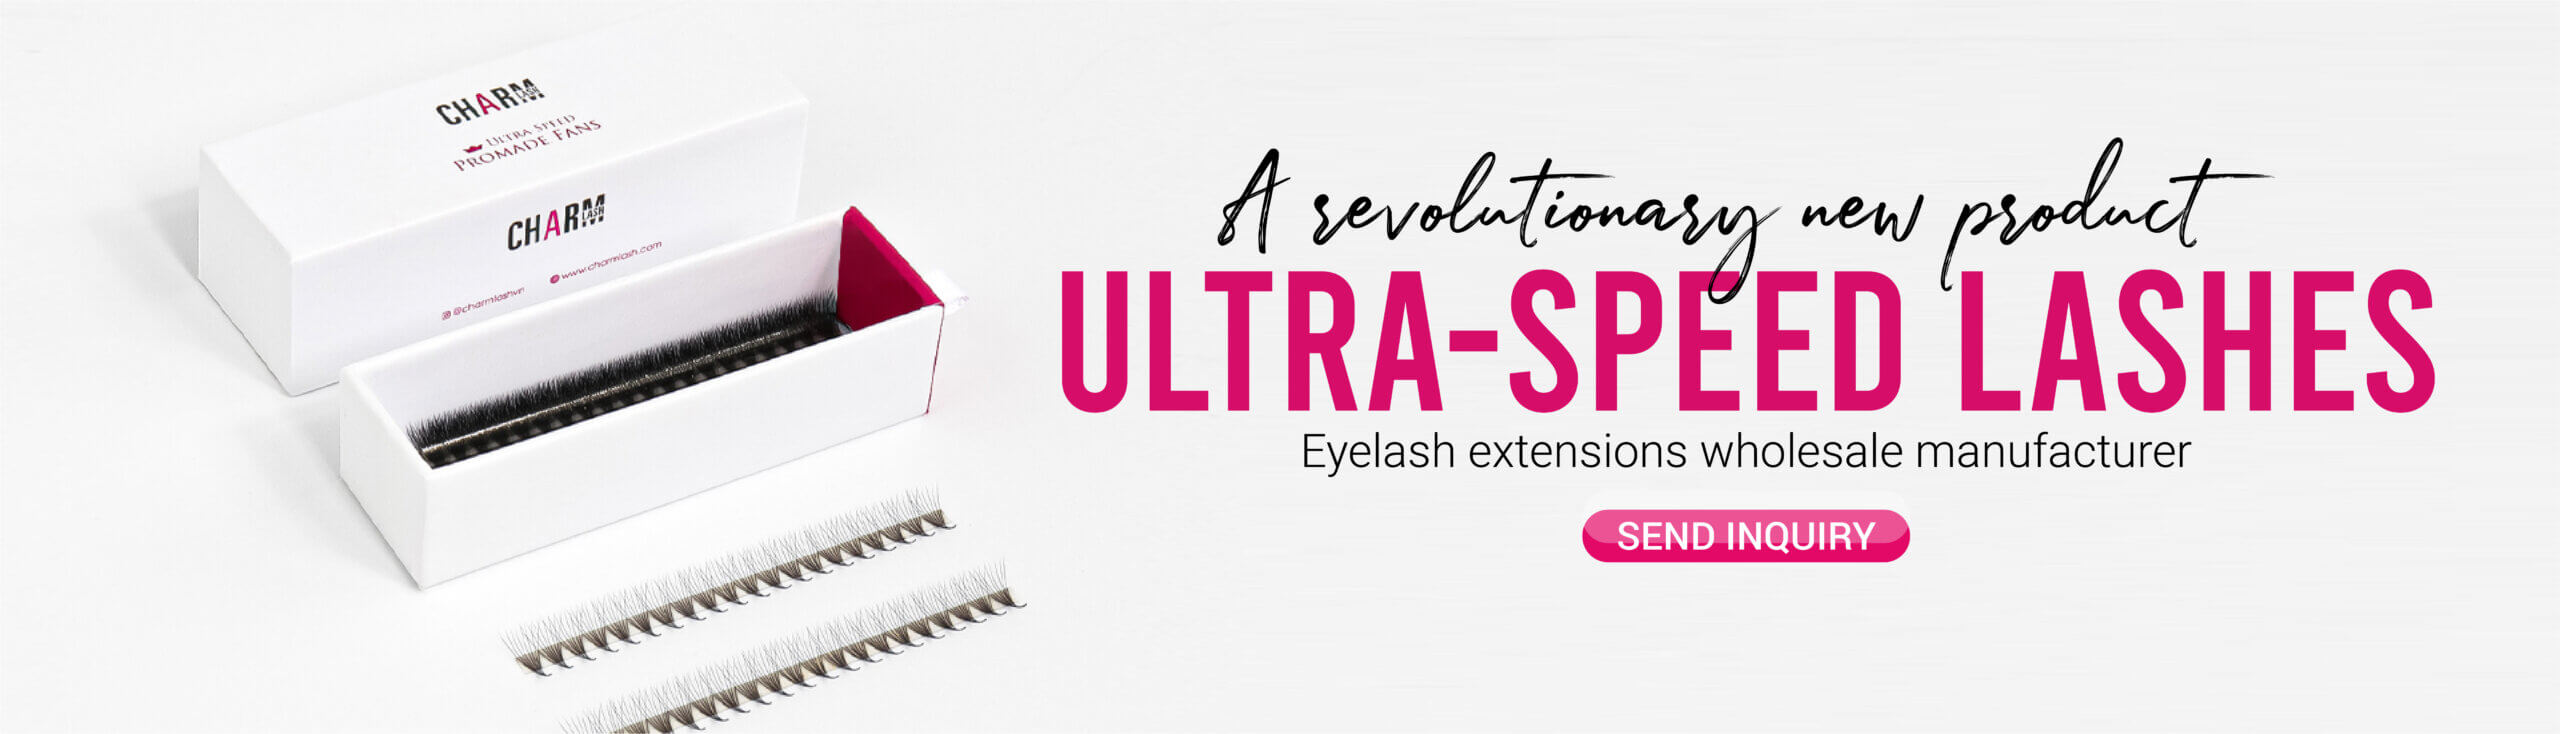 Ultra-speed-fan-lashes-eyelash-extensions-wholesale-manufacturer-eyelash-extensions-wholesale-lash-supplies-private-label-service-OEM-ODM-Korean-PBT